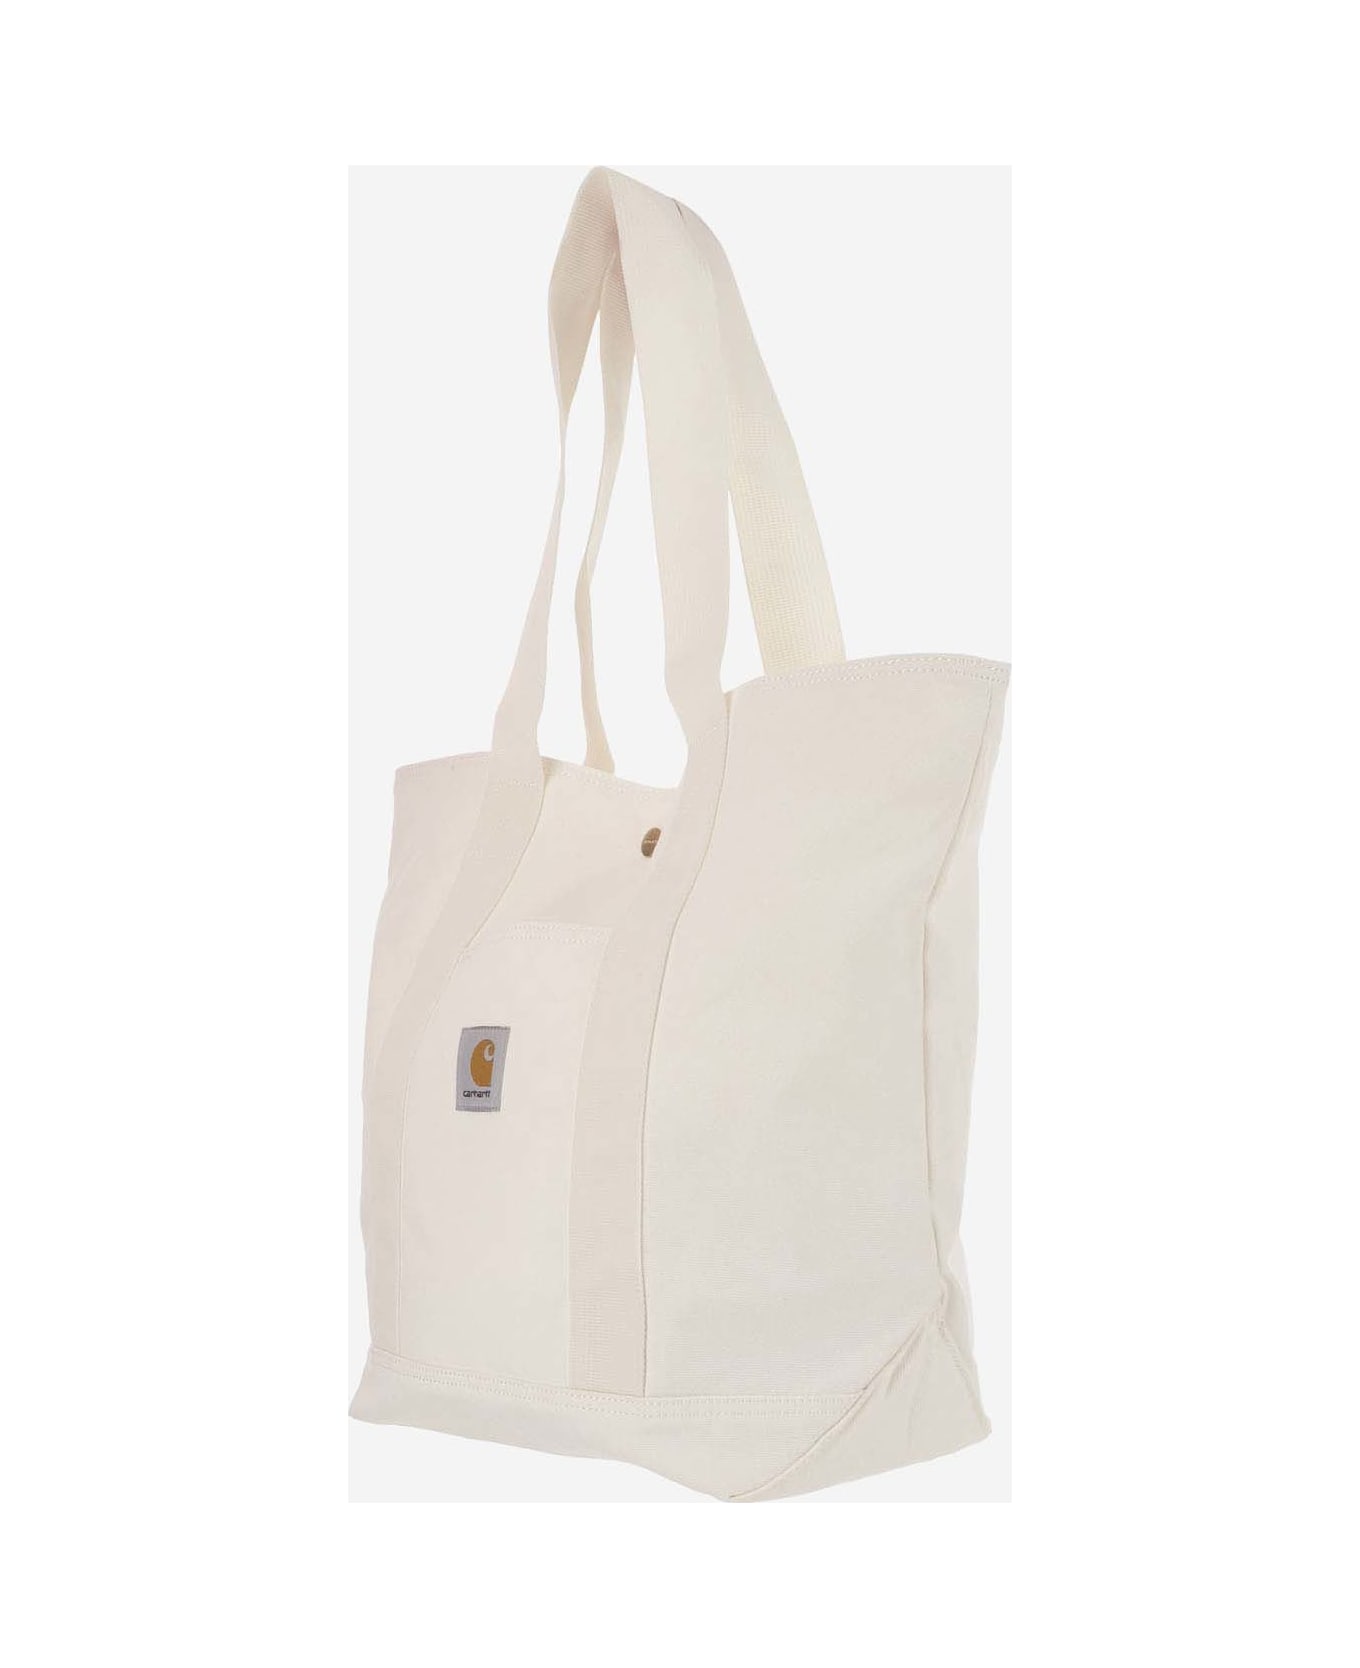 Carhartt Canvas Tote Bag With Logo - Ivory